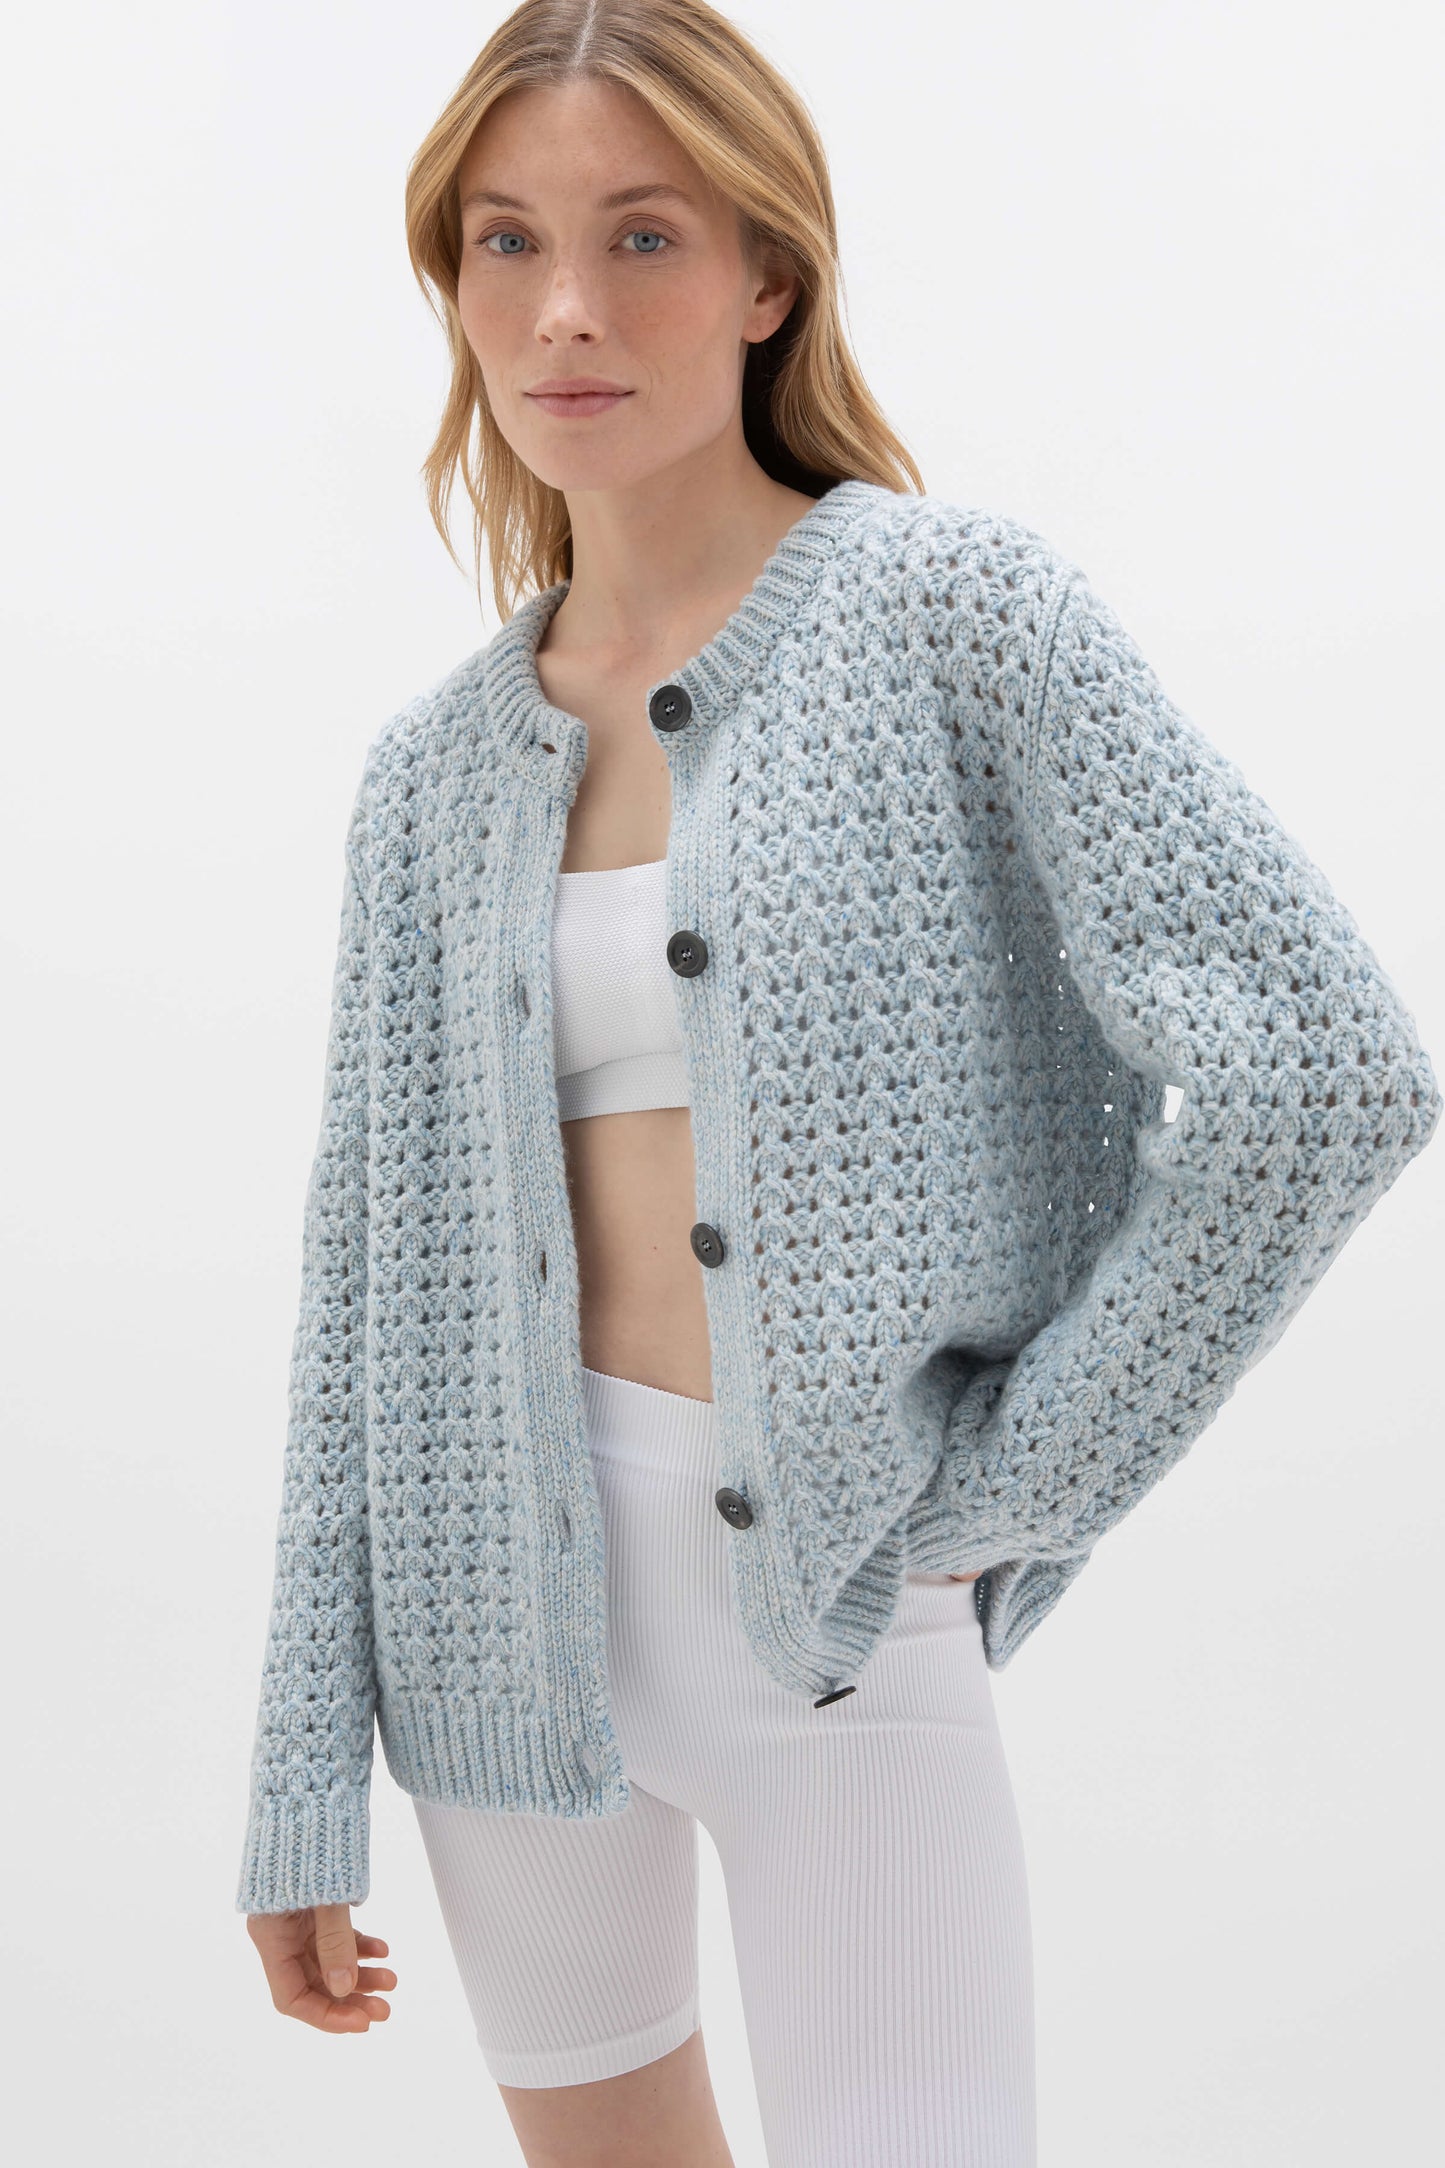 Johnstons of Elgin SS24 Women's Knitwear Sea Breeze Blue Donegal Marl Crochet Stitch Donegal Cashmere Cardigan KAB05215004612